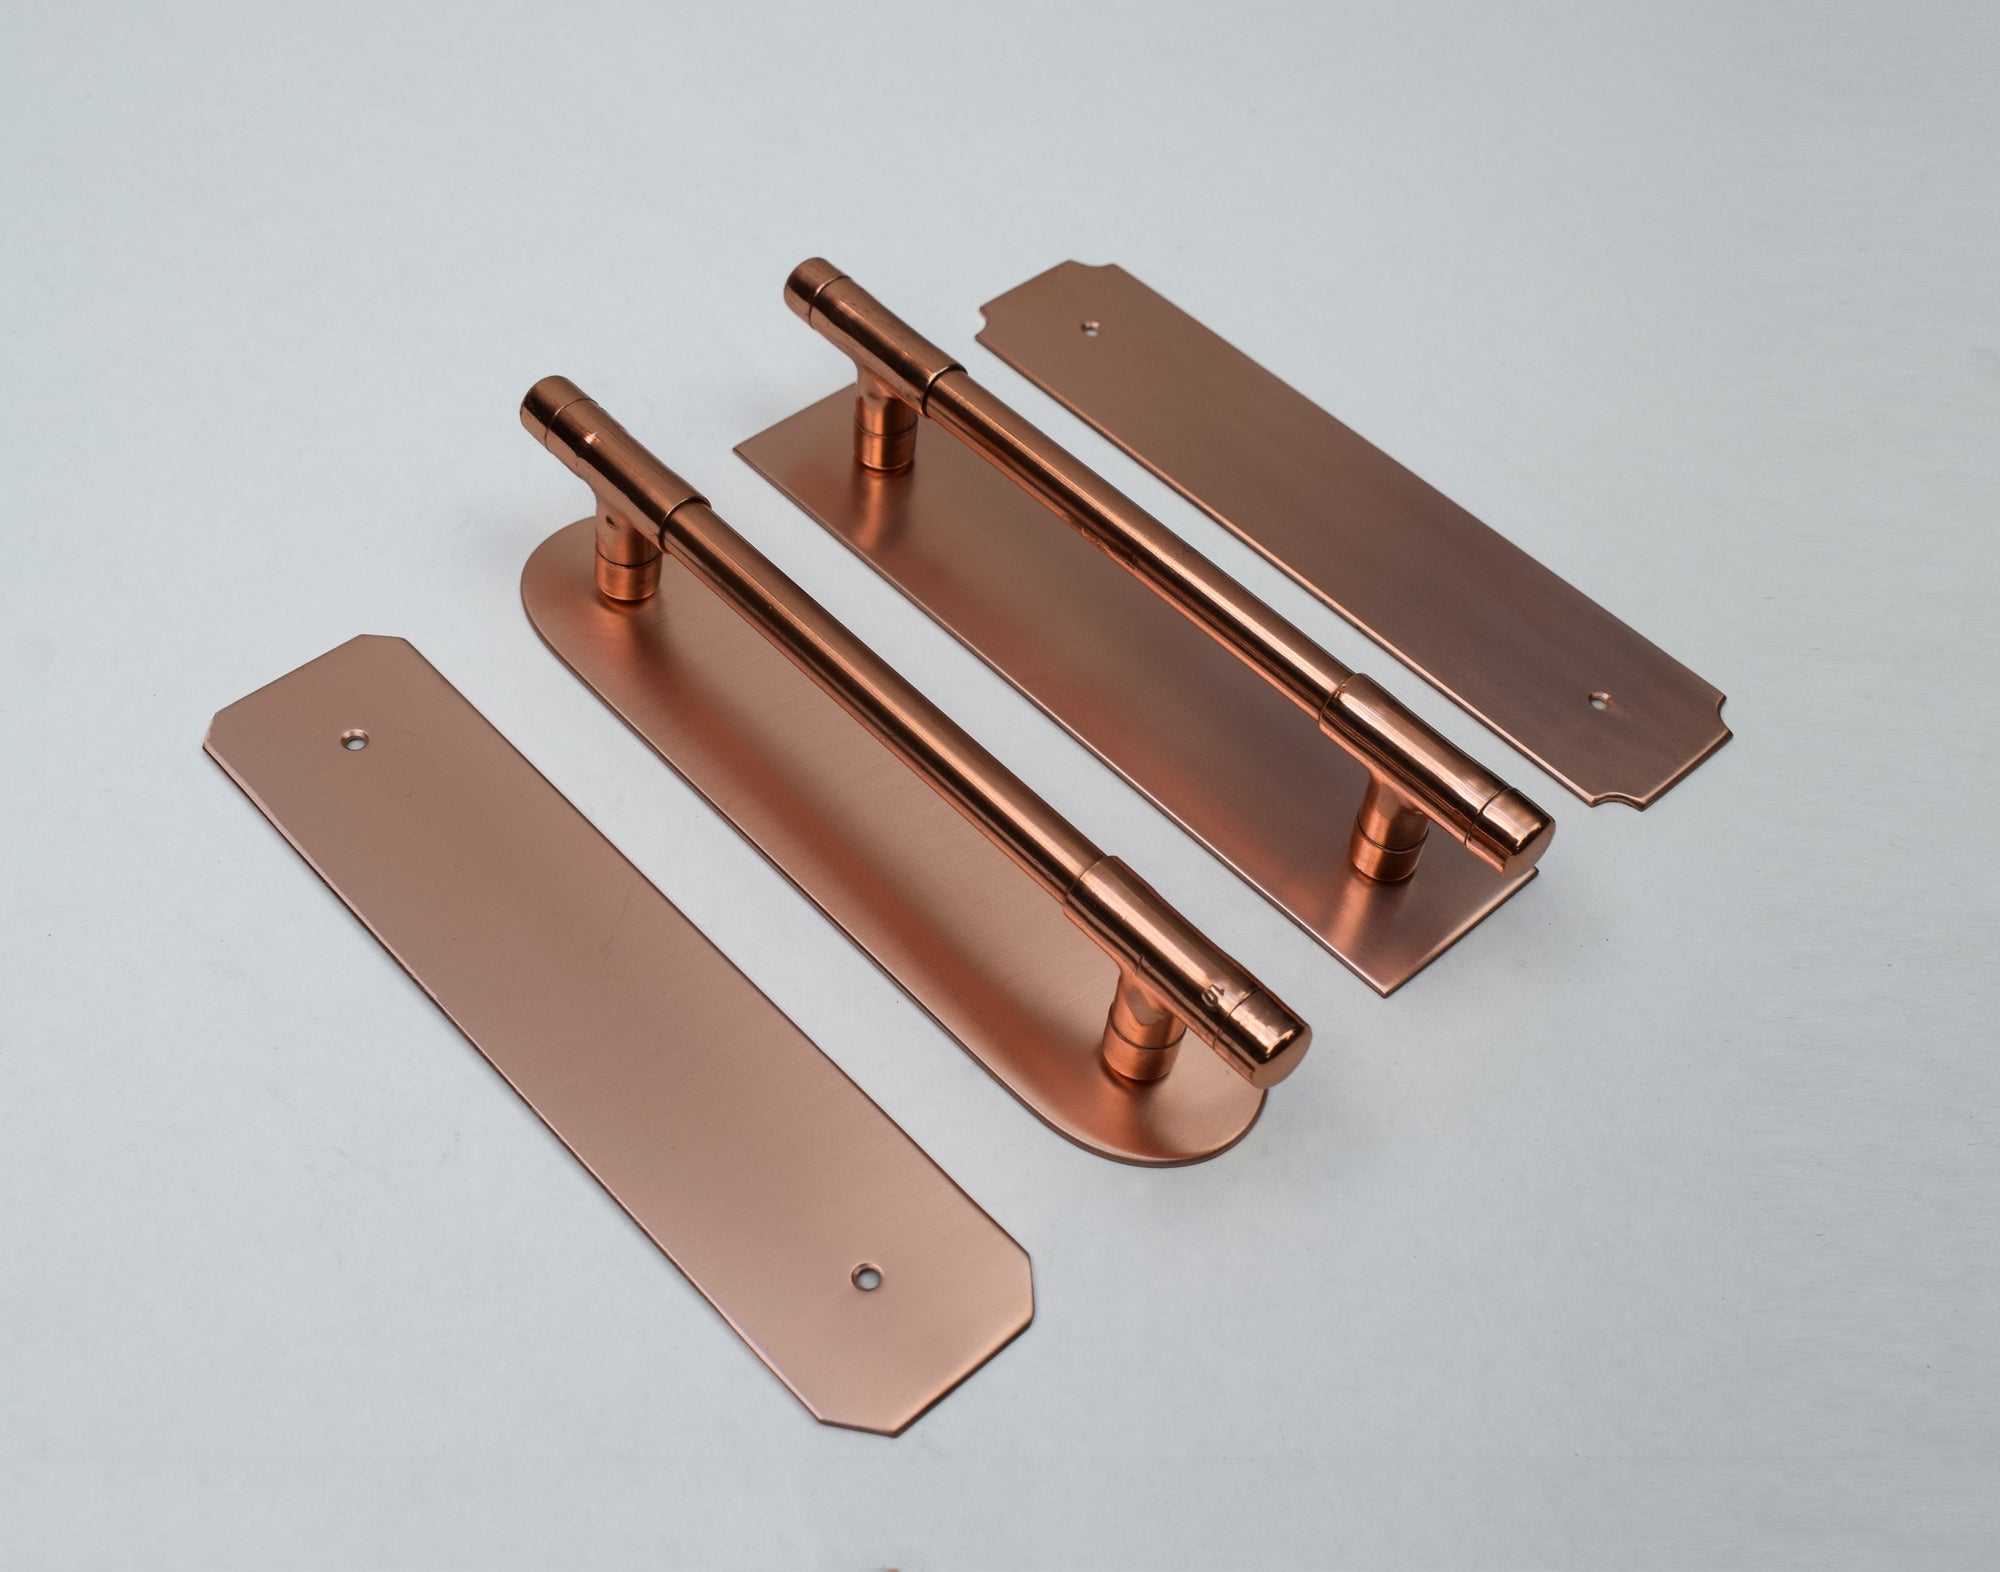 Copper backplates with polished copper handles fitted